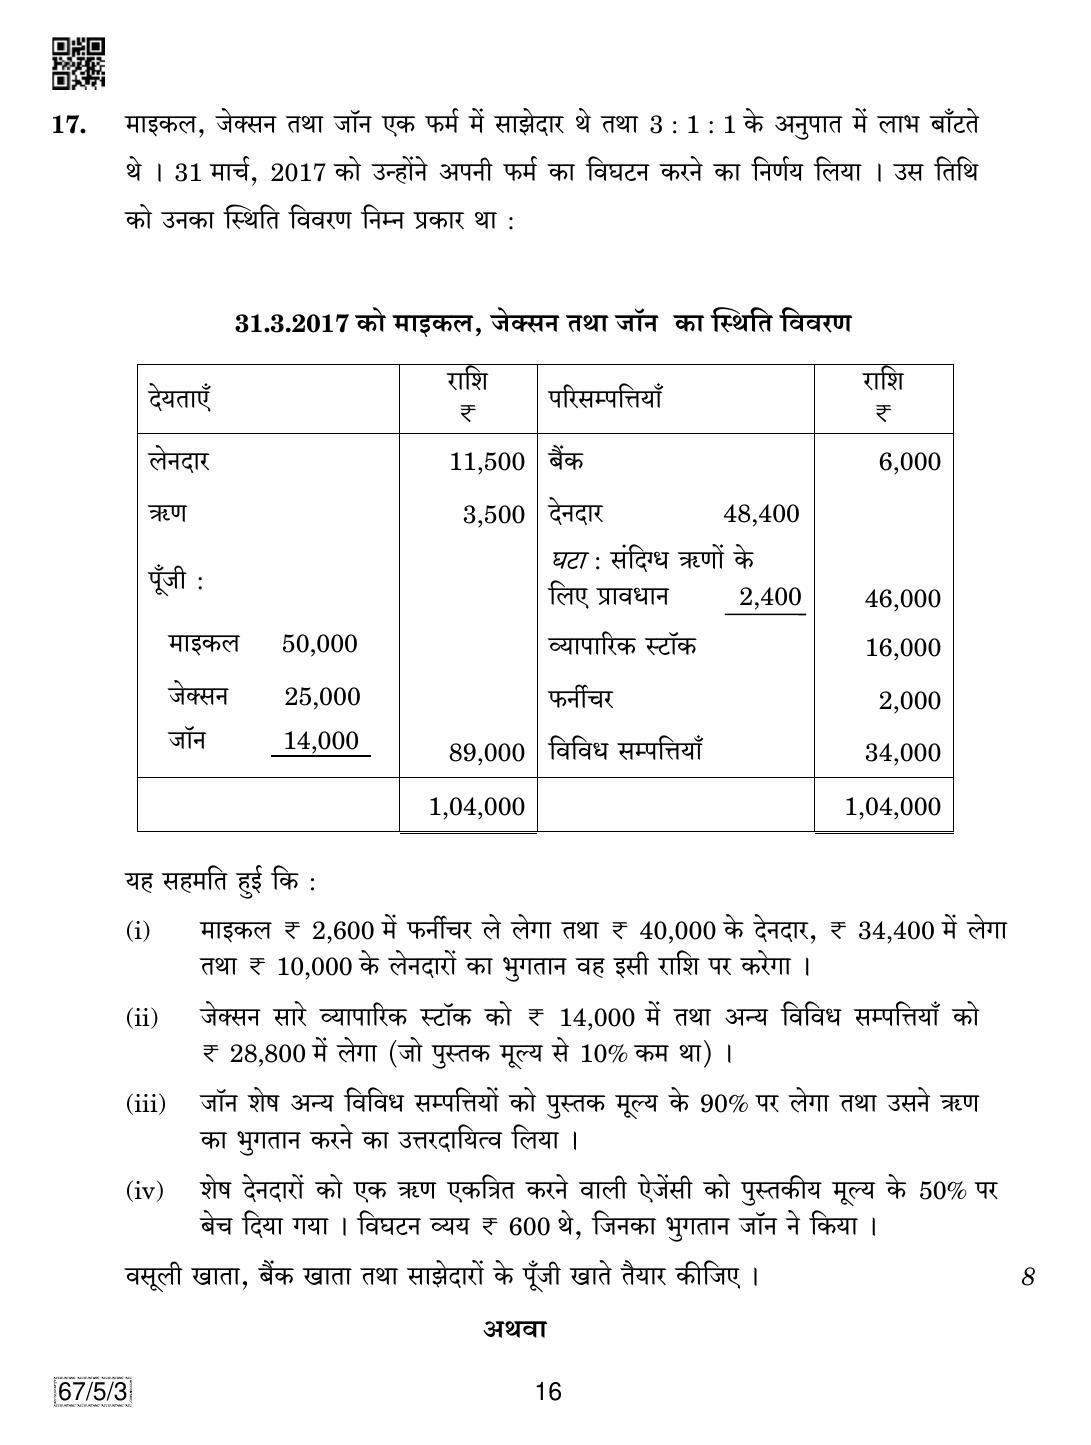 CBSE Class 12 67-5-3 Accountancy 2019 Question Paper - Page 16